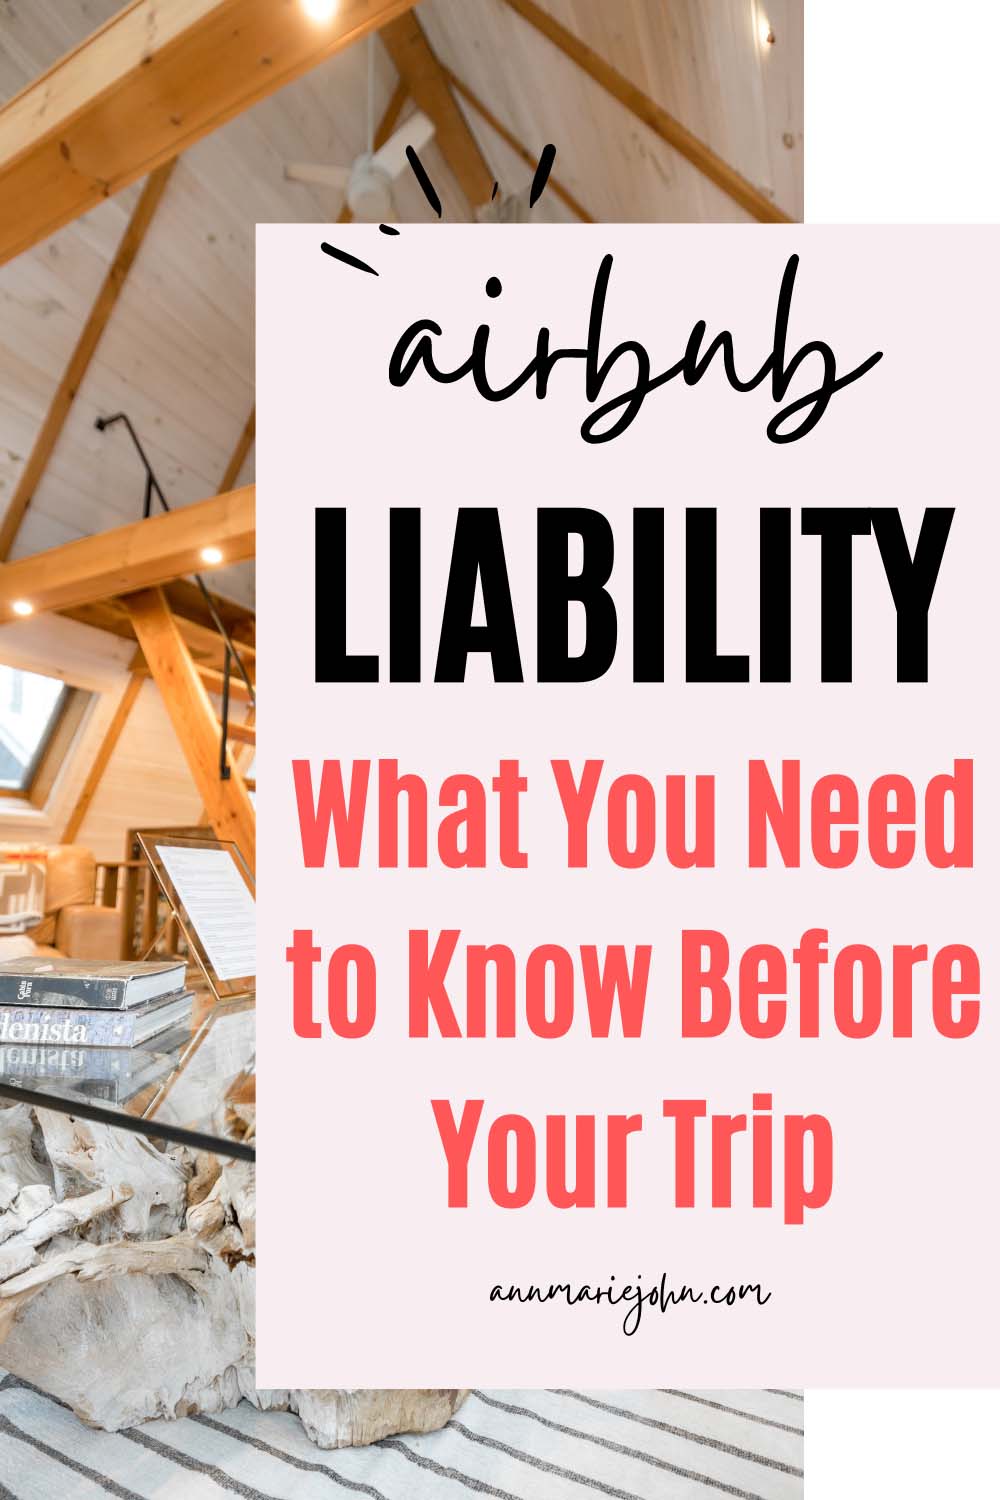 AirBnB Liability: What You Need to Know Before Your Trip